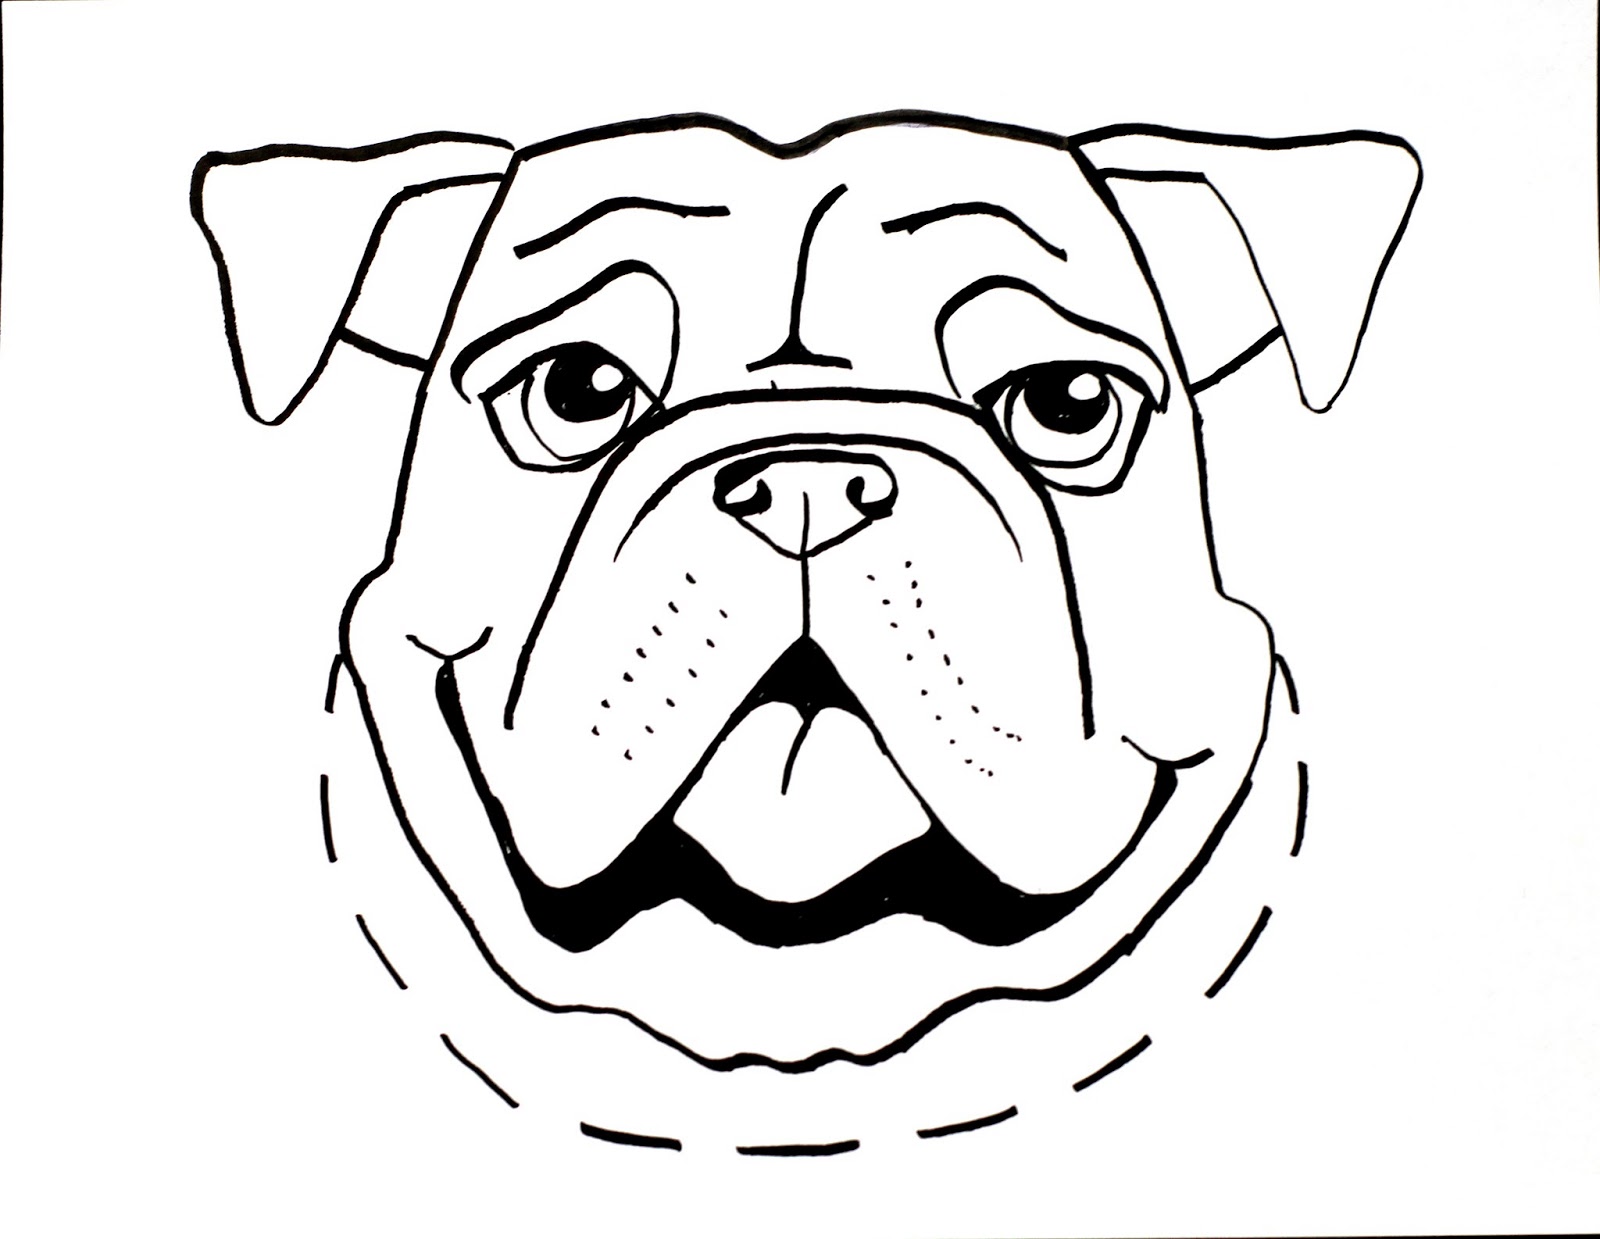 Simple Line Drawing of a Dog images